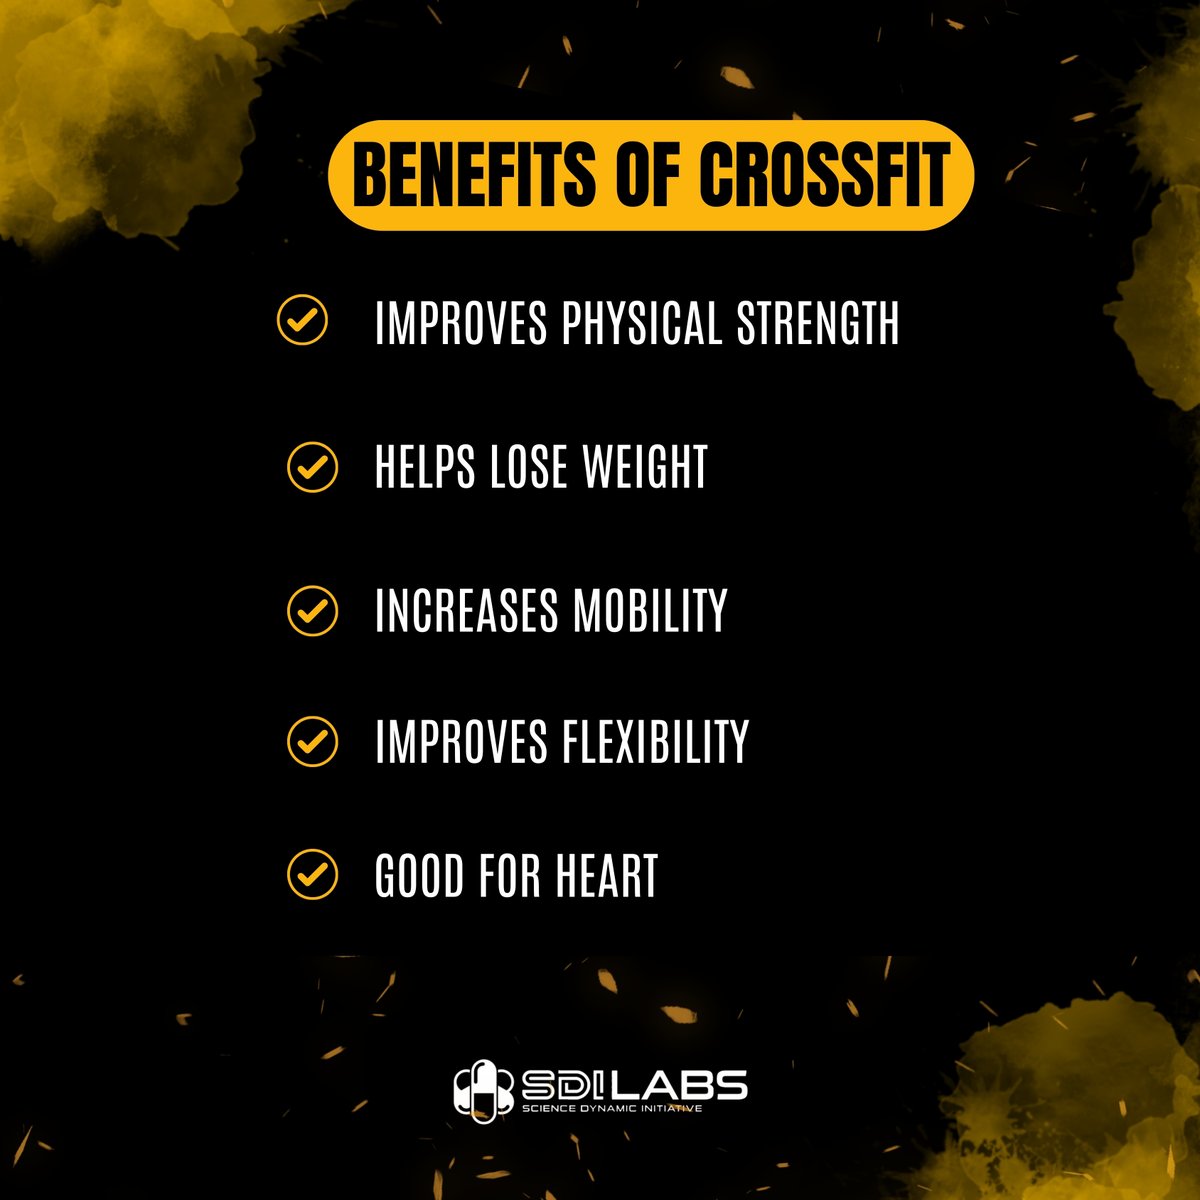 Check out benefits of crossfit. 
----
🌐 legalsteroids.com
.
#sdilabs #gymmotivation #gym #fitness #fitnessmotivation #gymlife #fit #workout #bodybuilding #motivation #fitfam #muscle #fitnessmodel #training #instafit #fitnessaddict #abs #fitspo #gymtime #health #healthy